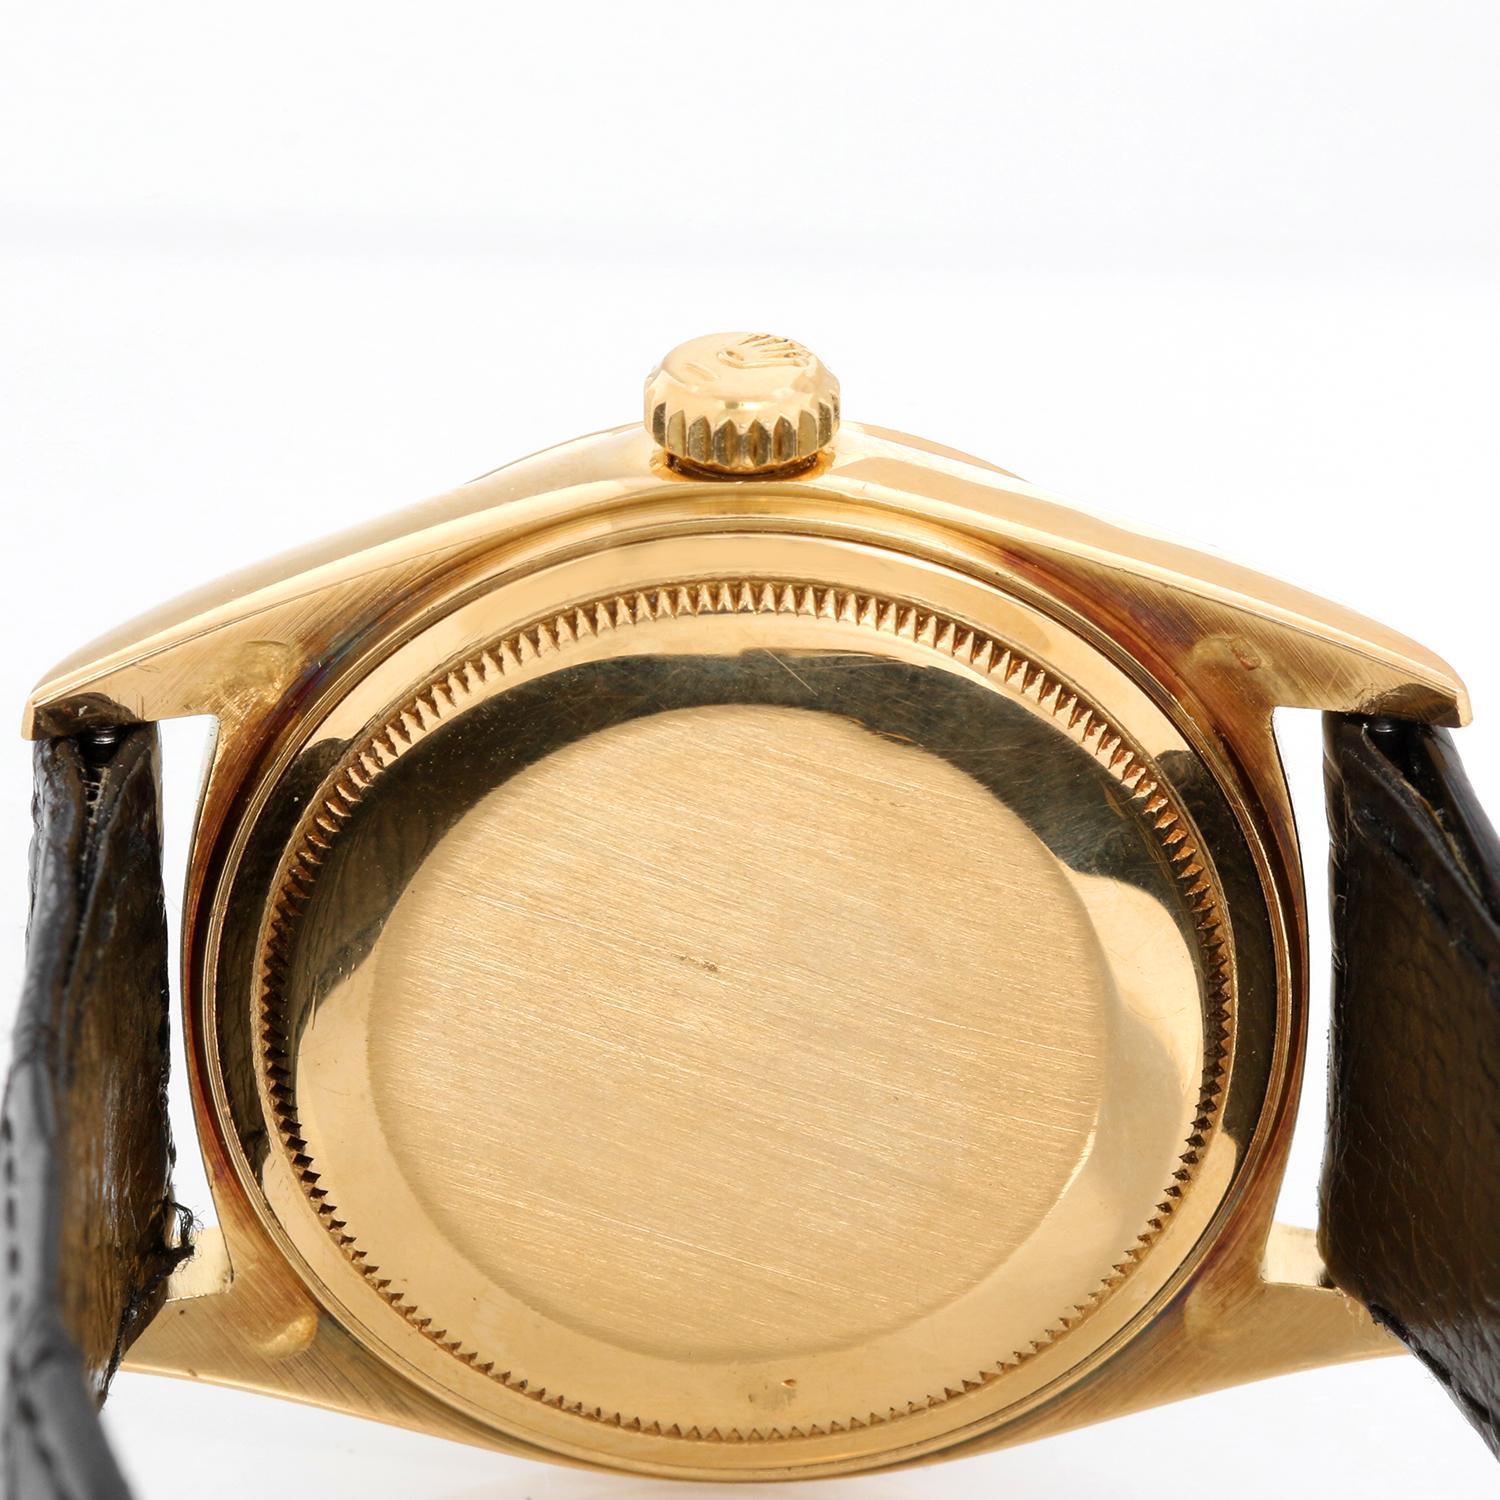 Very Rare Rolex President Day-Date Men's 18k Yellow Gold Watch 1811 For Sale 3